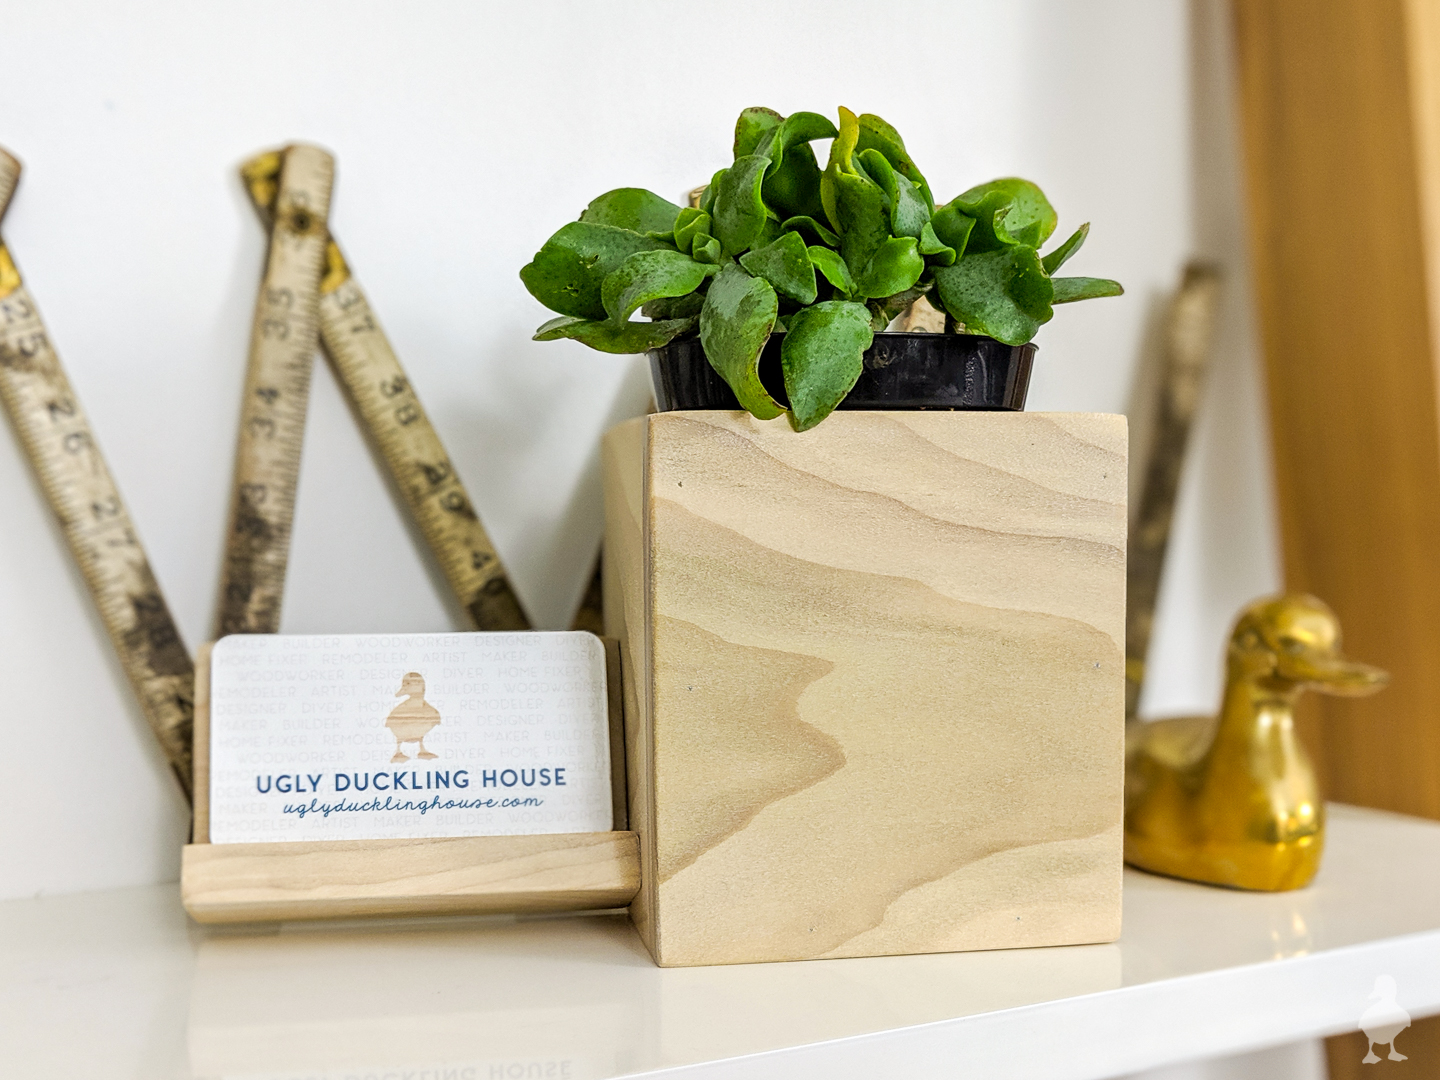 biz card holder with succulent planter combined